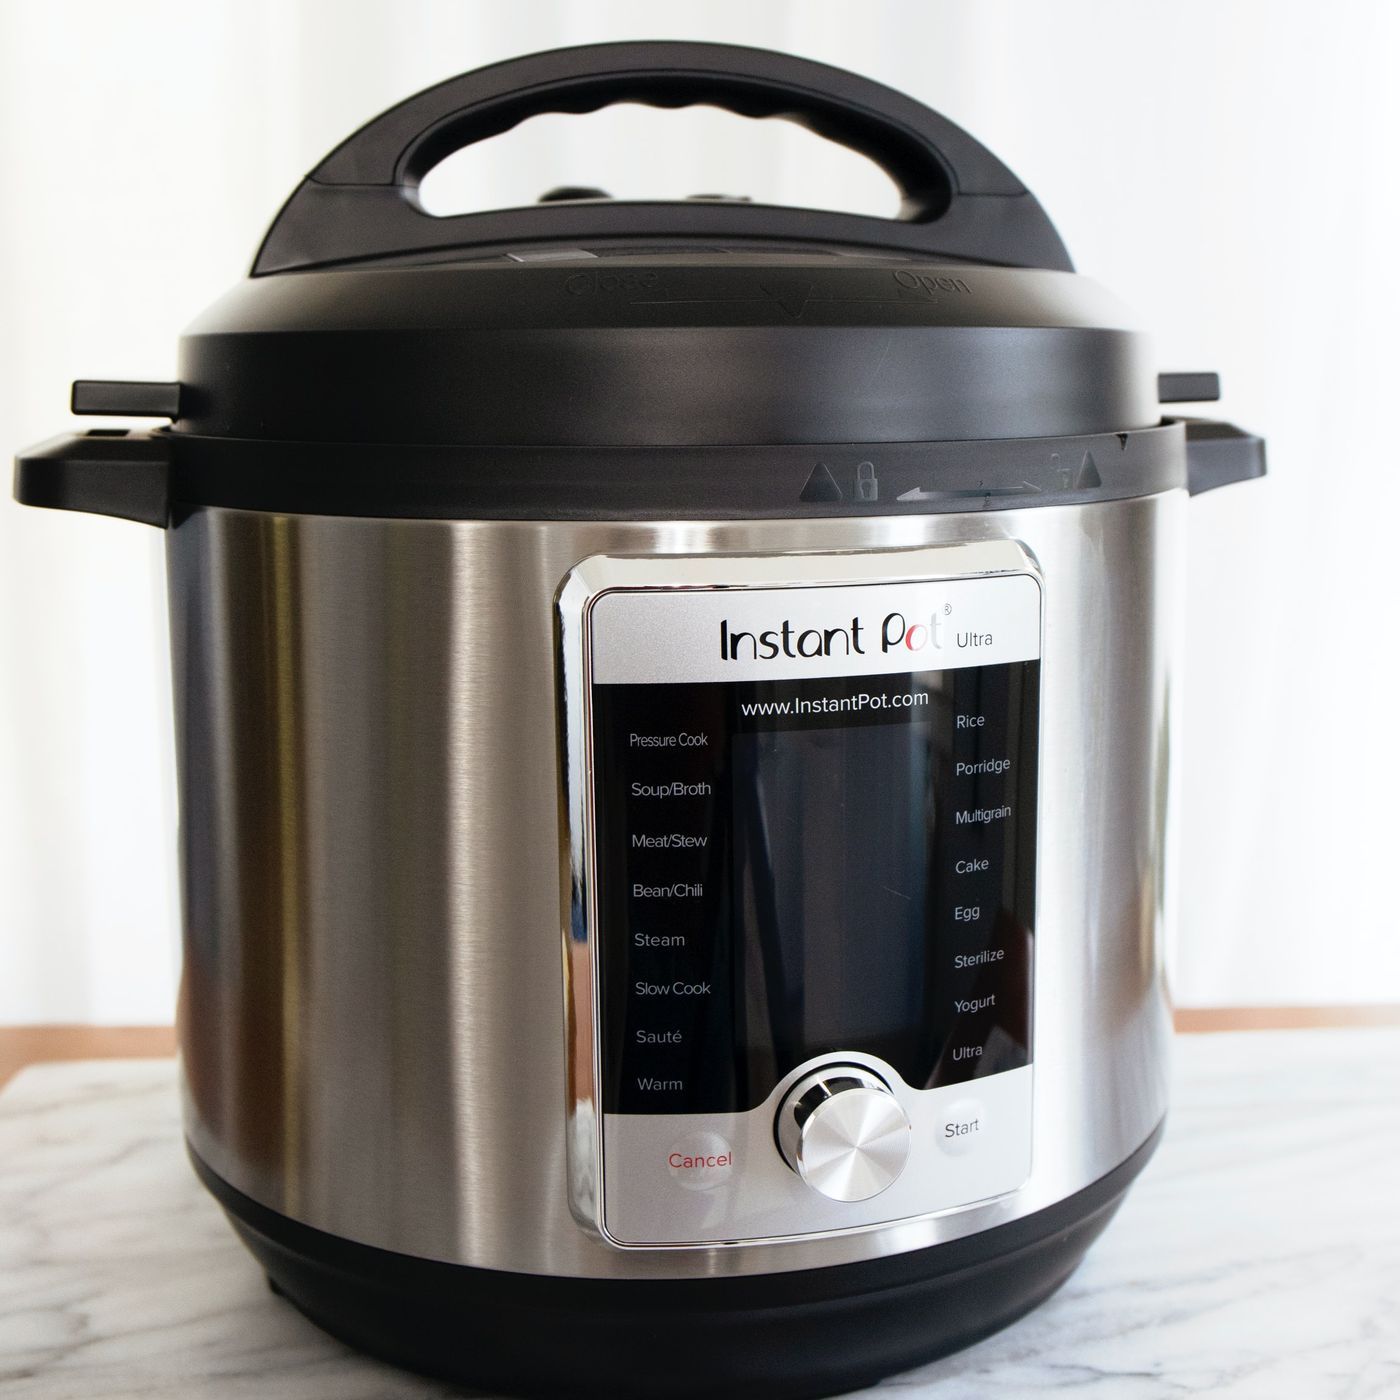 Cooking rice with Instant Pot — Photo: Unsplash/thekatiemchase